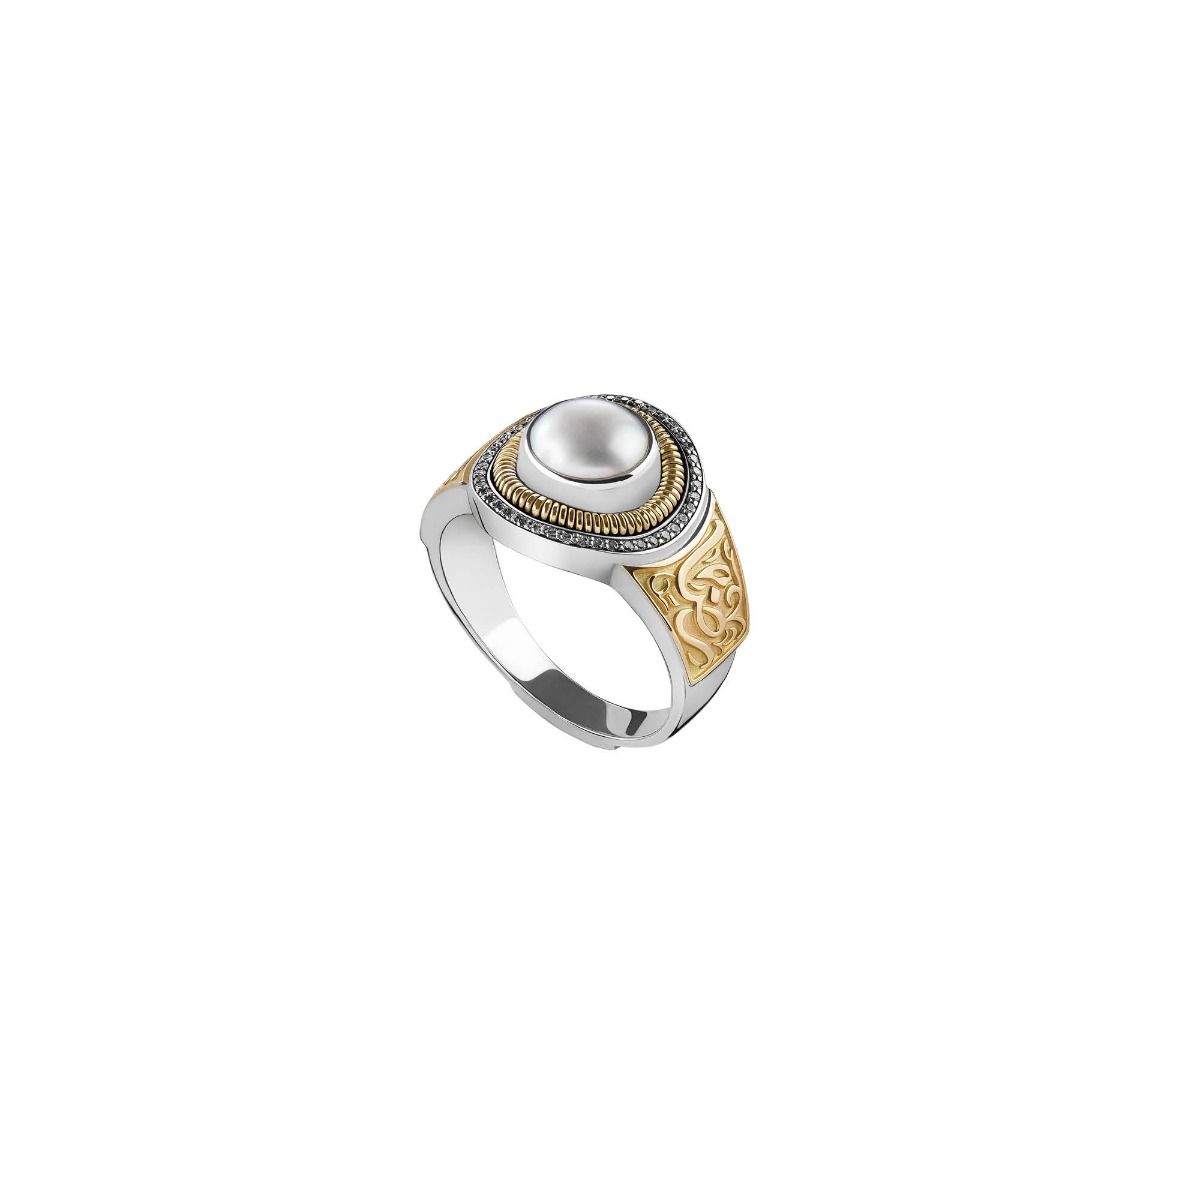 Signature Calligraphy Ring by Azza Fahmy - Designer Rings